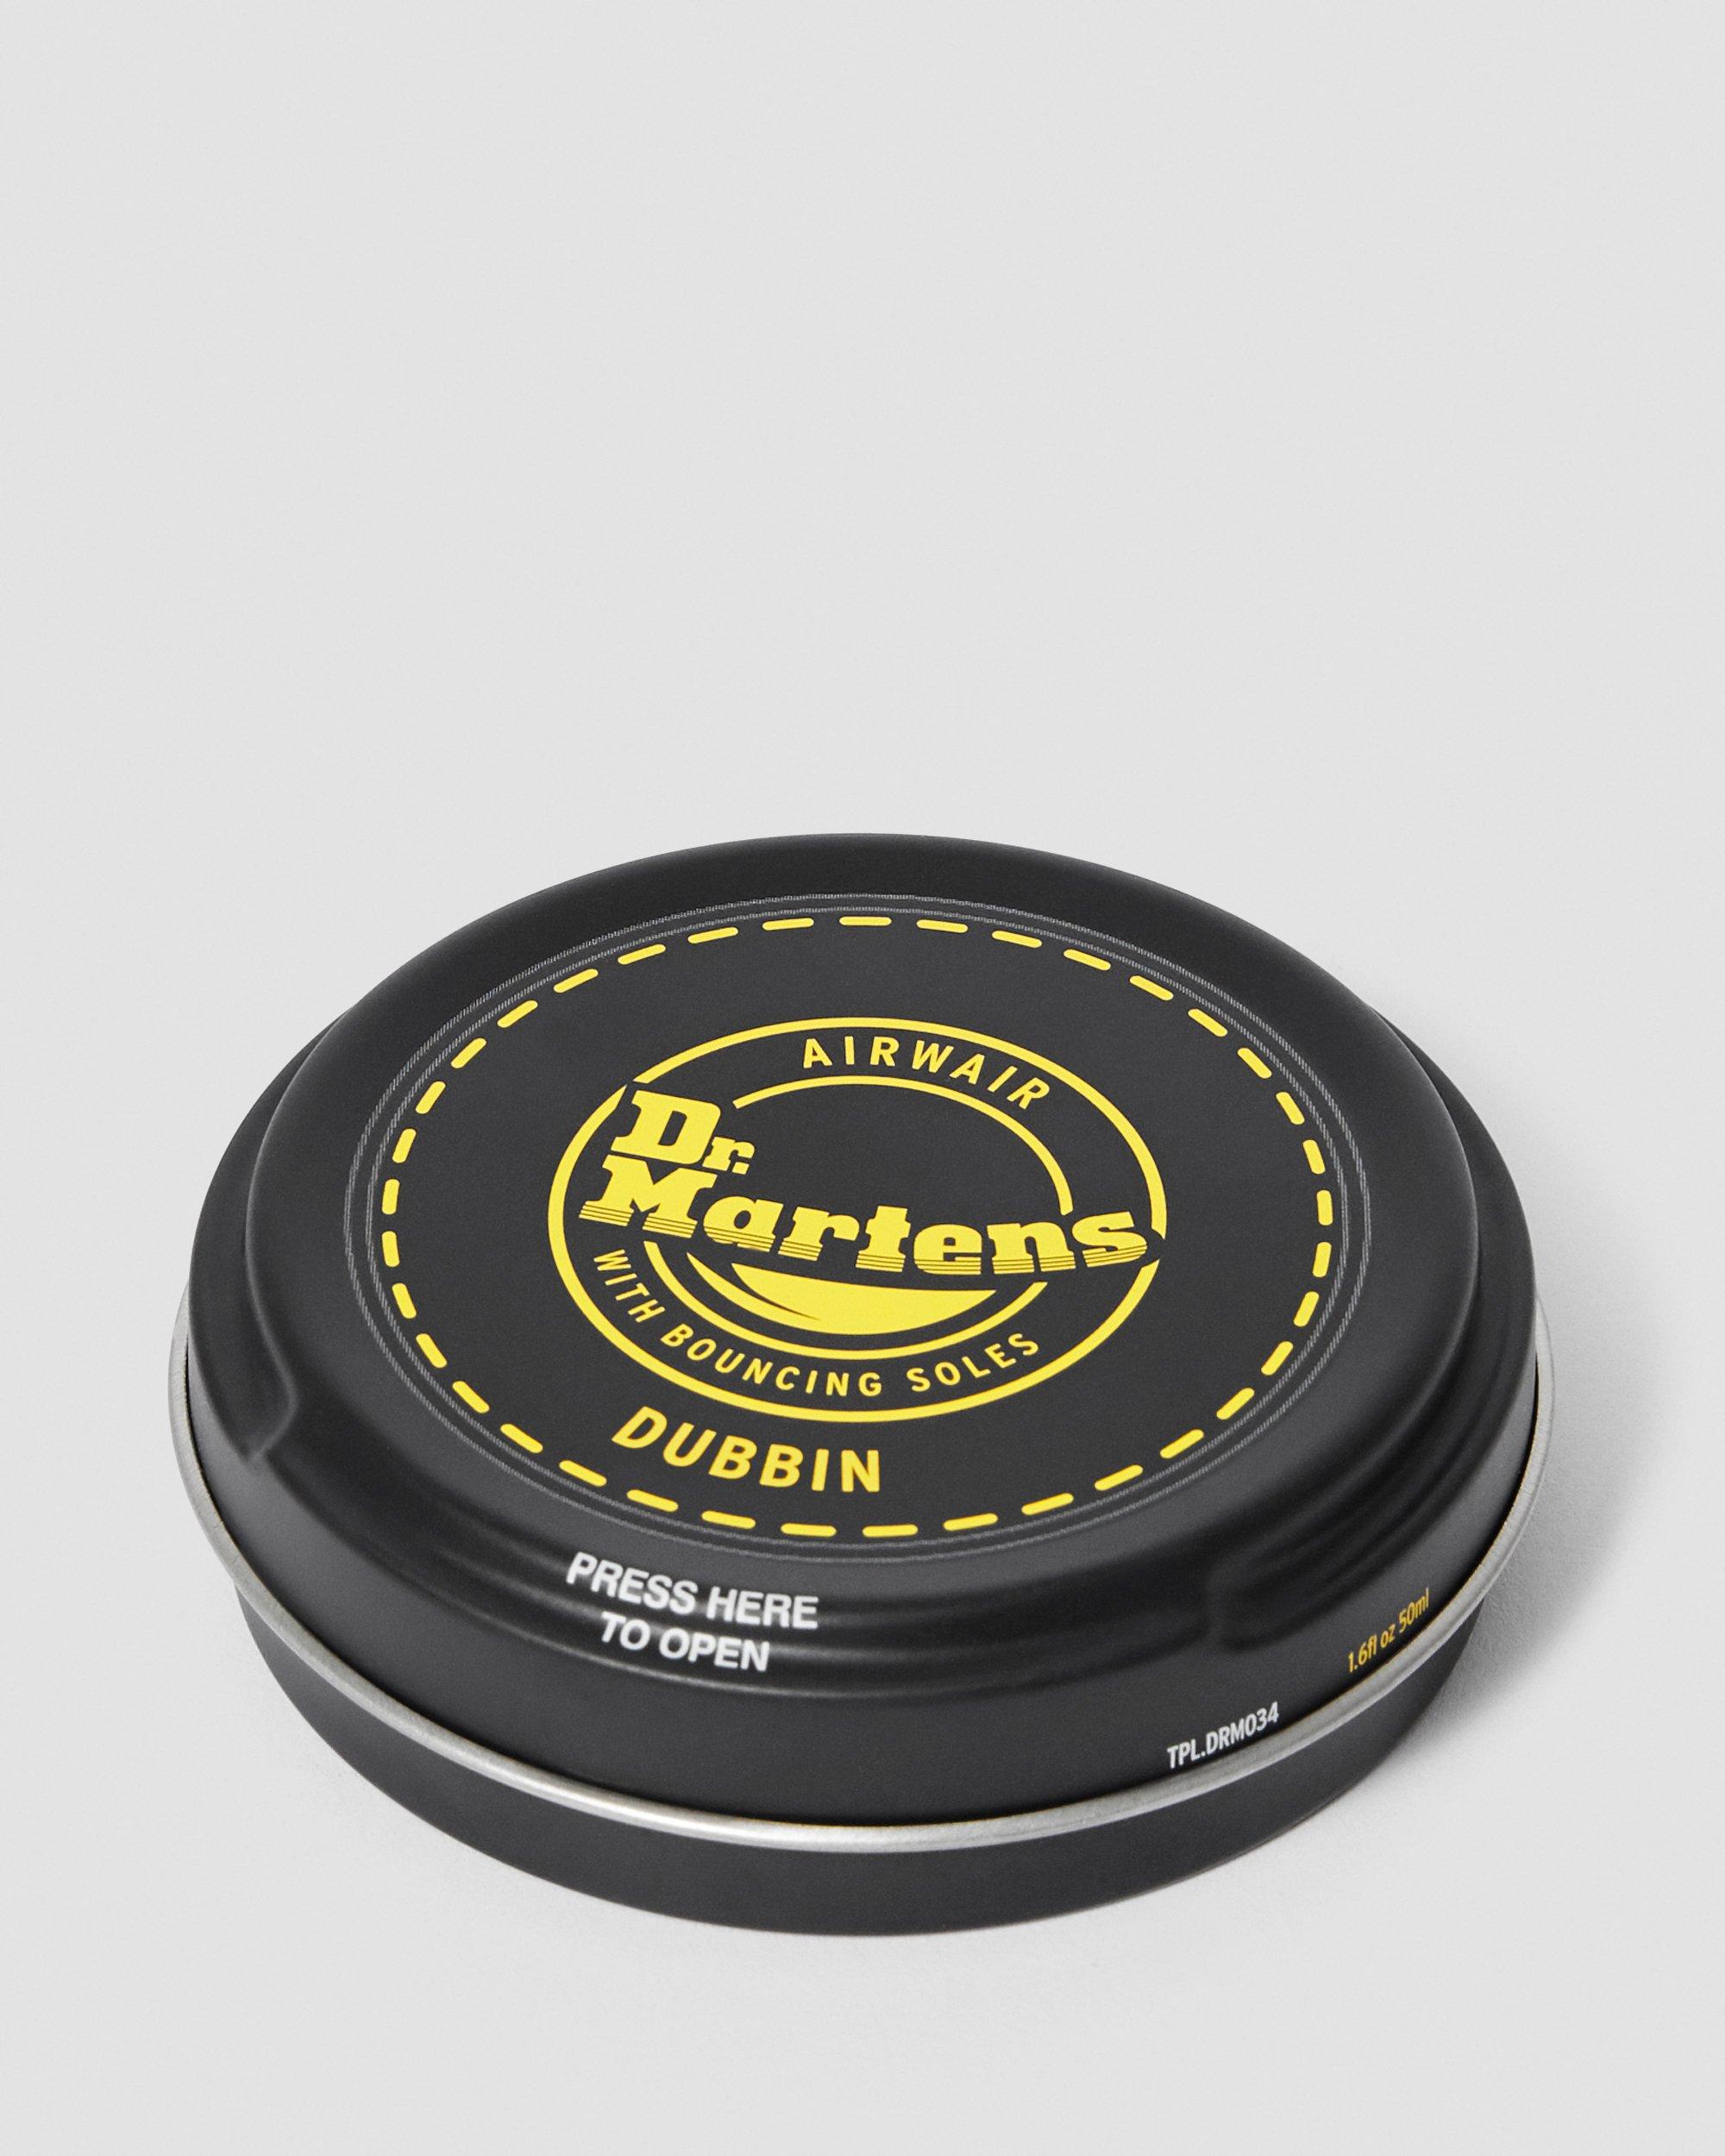 Punch Dubbin Neutral Tin Waterproofs Protect Leather Shoe Boot Wax Shoe  Polish - Simpson Advanced Chiropractic & Medical Center